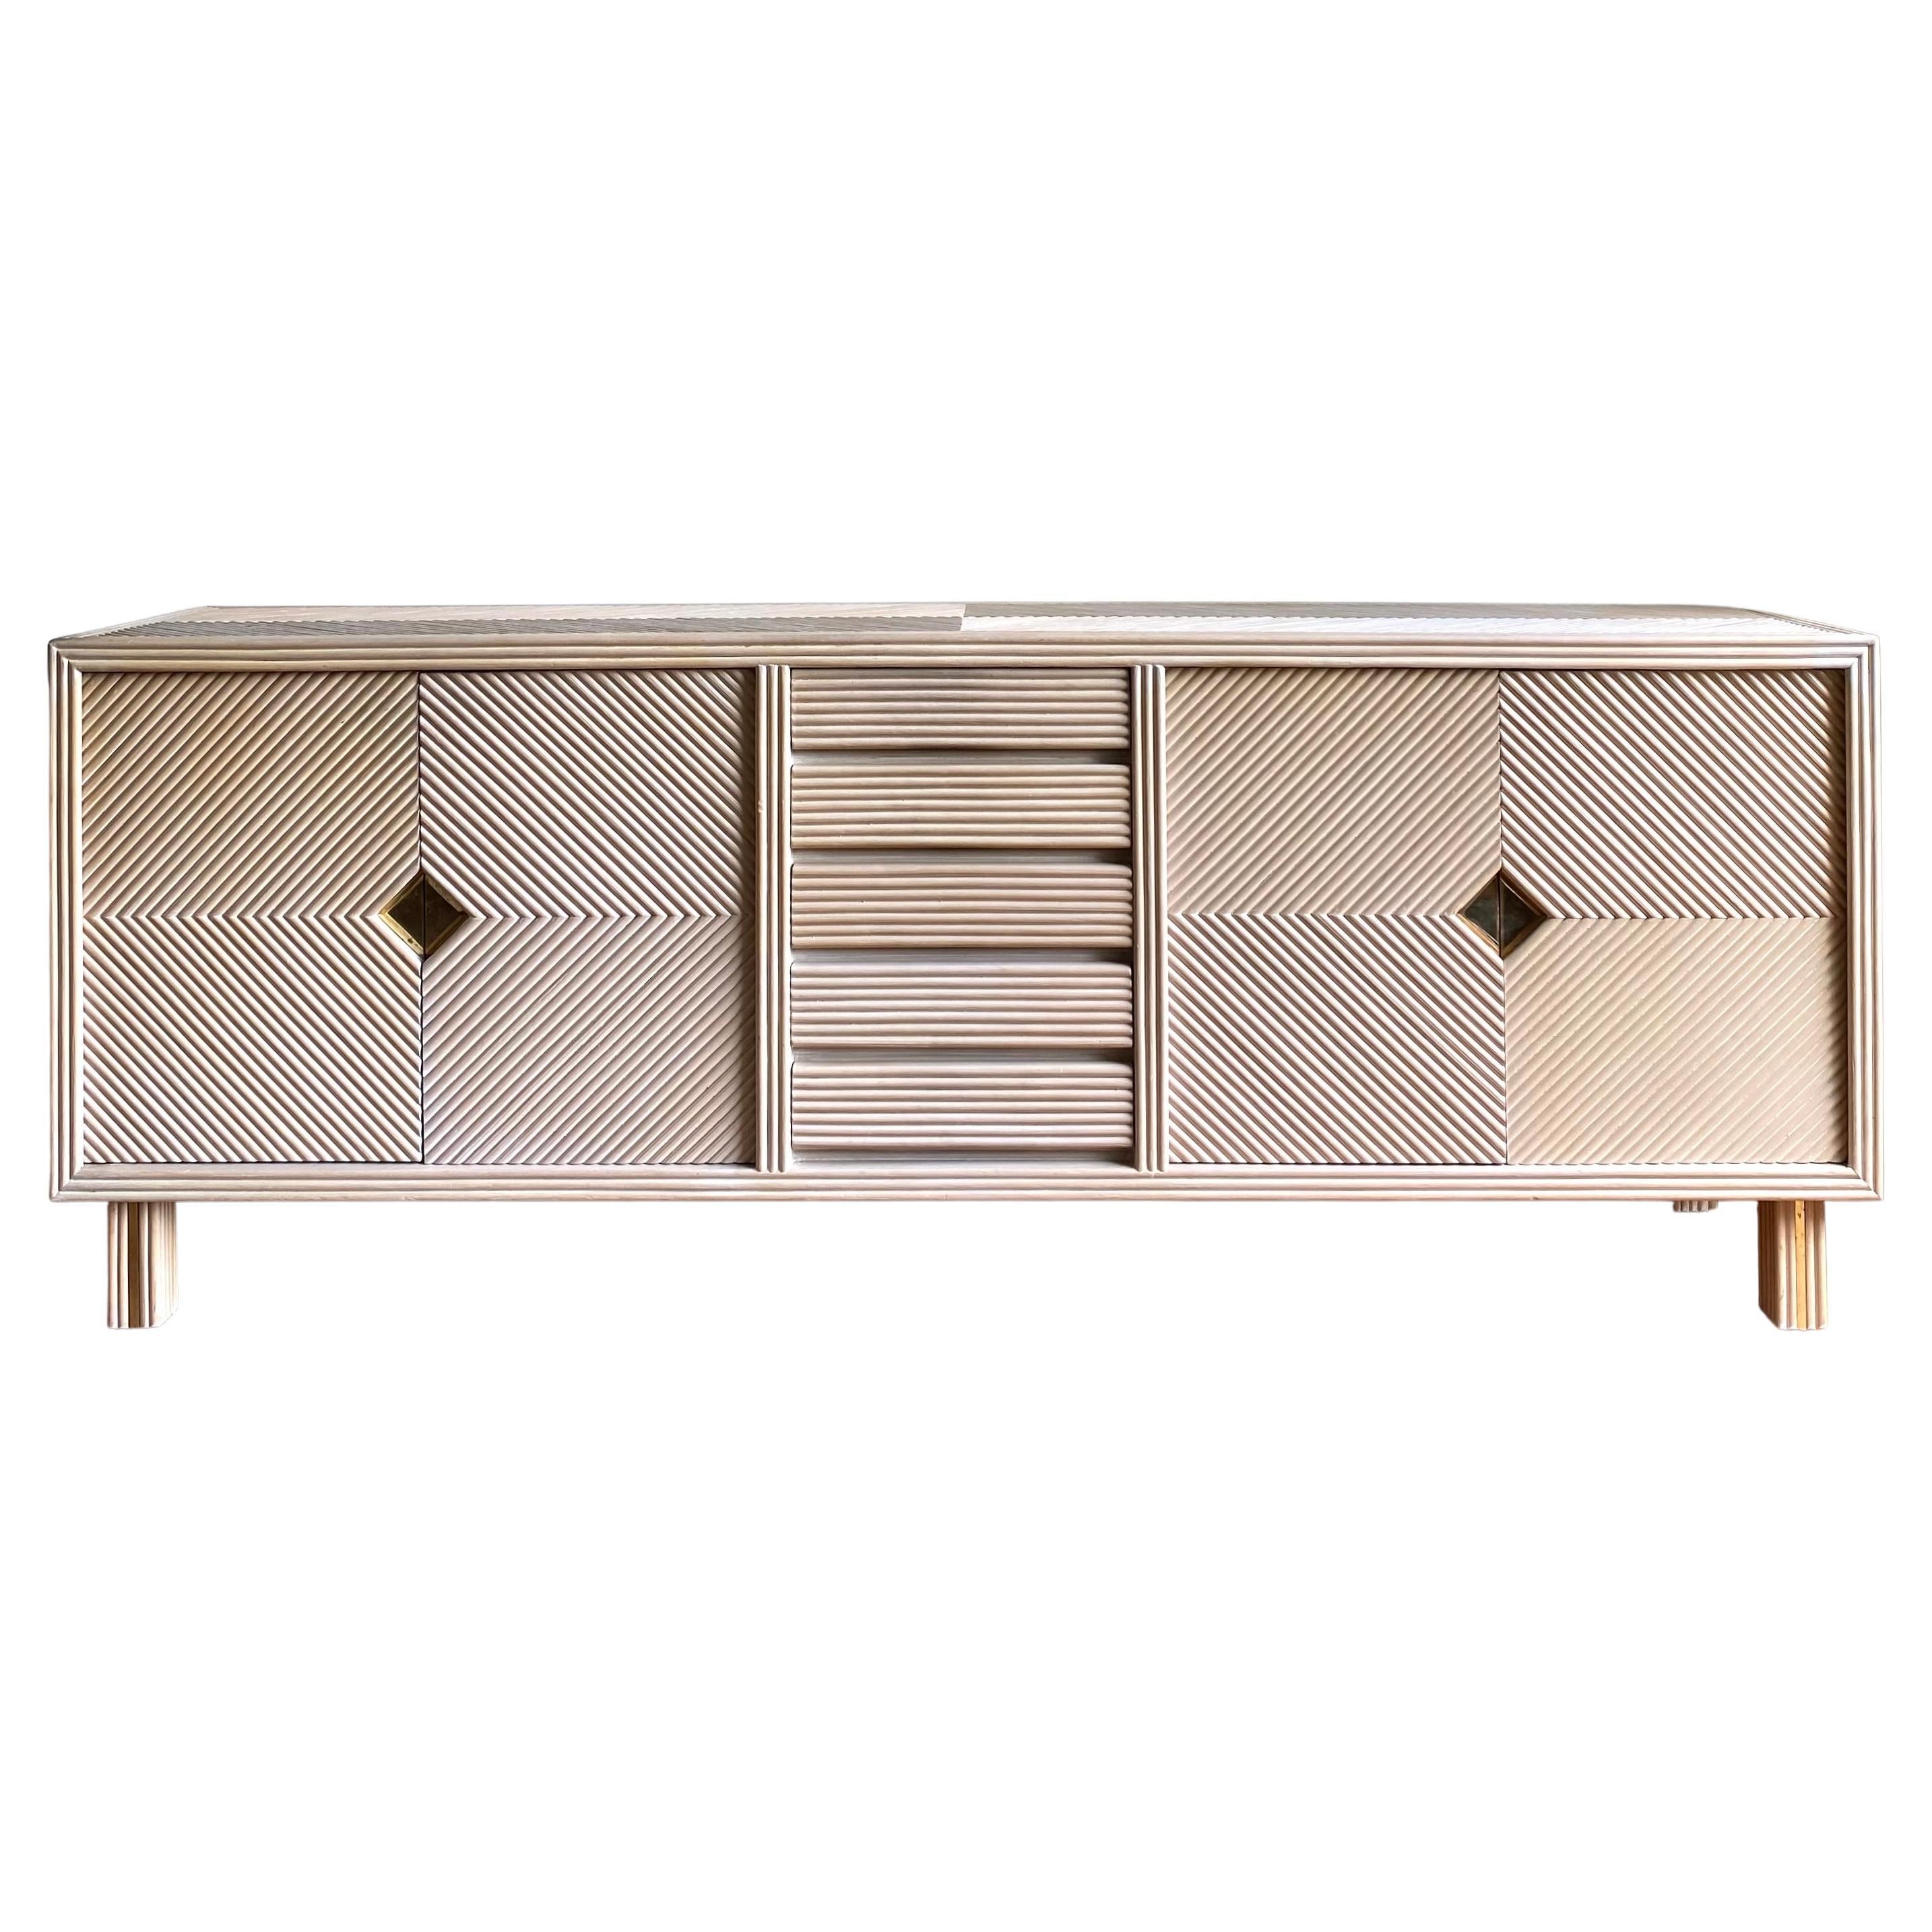 Salmon Colored Sideboard with pencil reed Brass look accents, circa 1970s For Sale